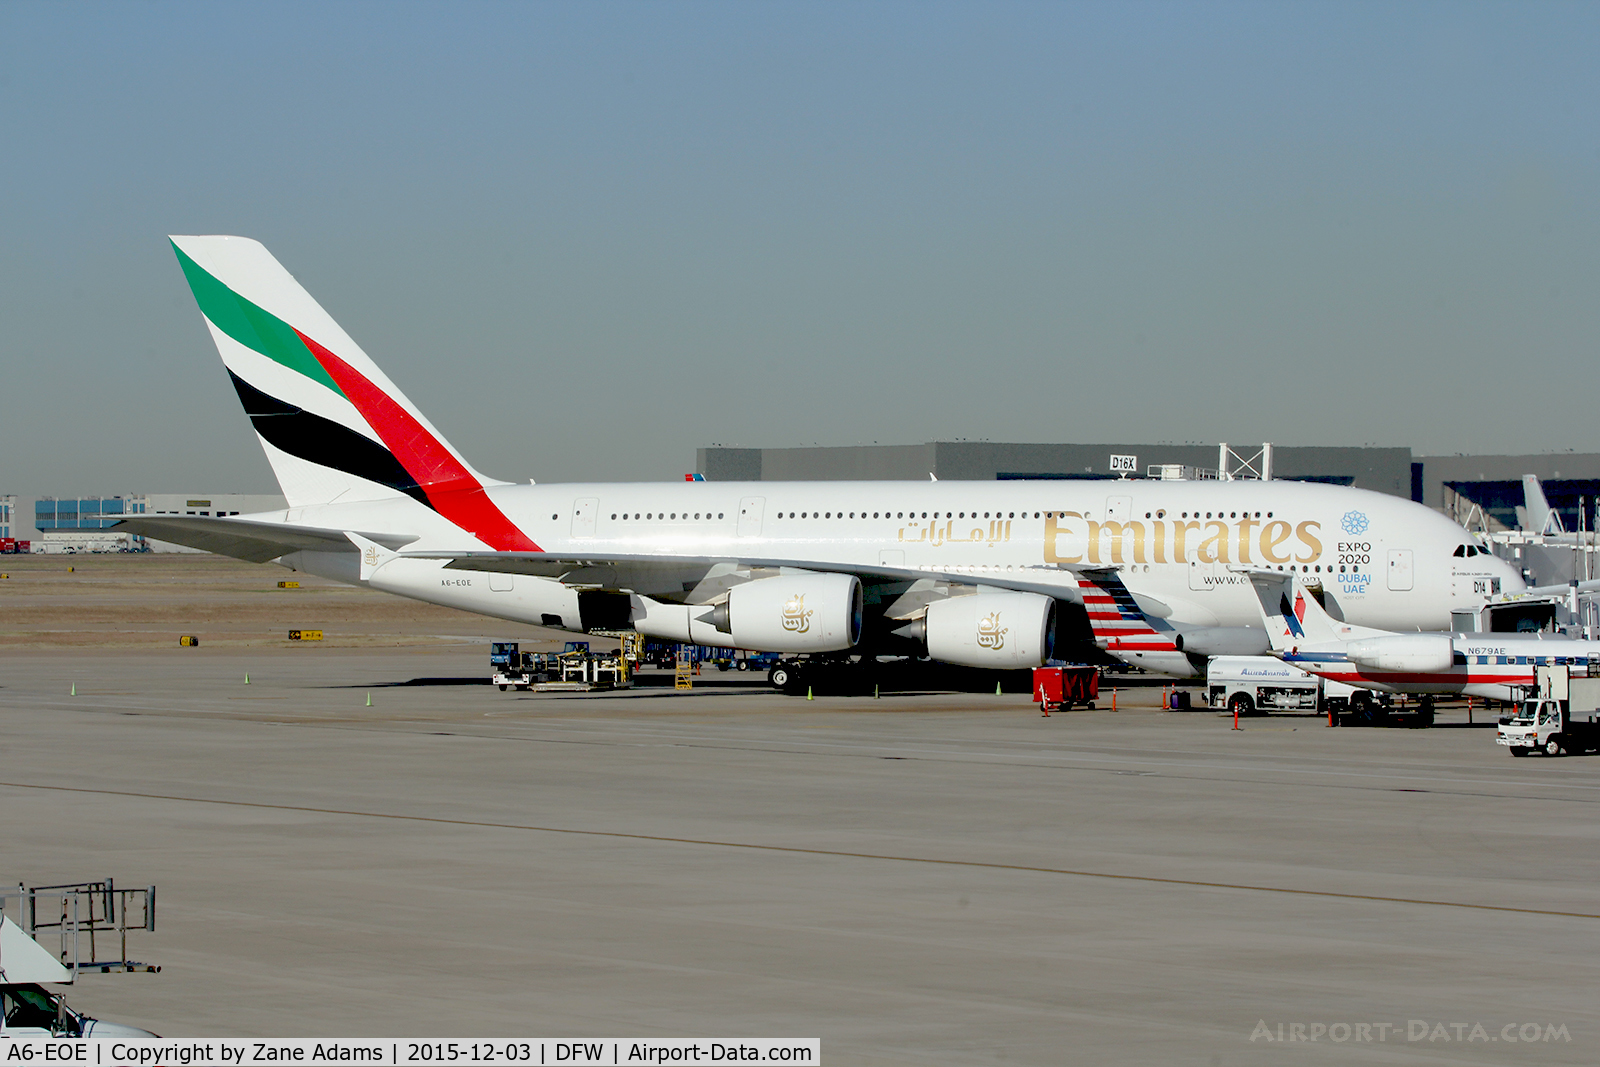 A6-EOE, 2014 Airbus A380-861 C/N 169, Emirates A380 at DFW Airport